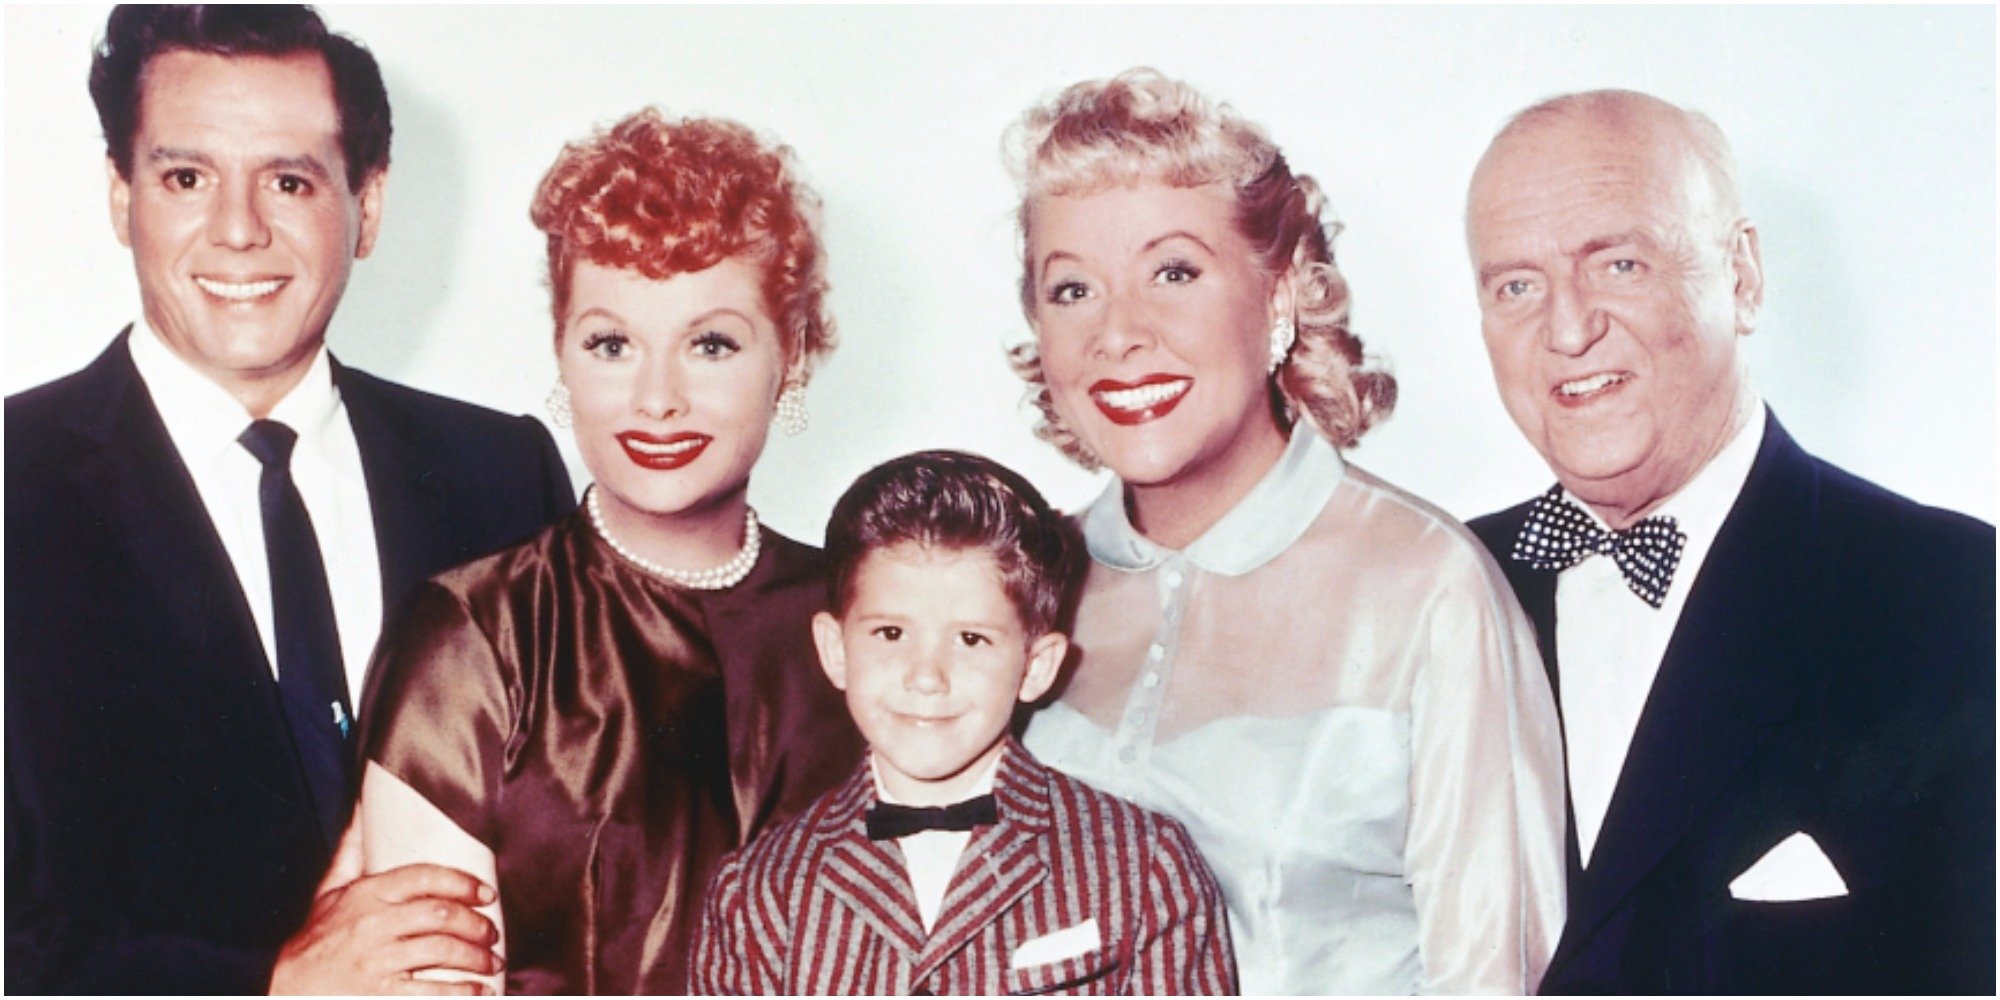 The cast of "I Love Lucy."